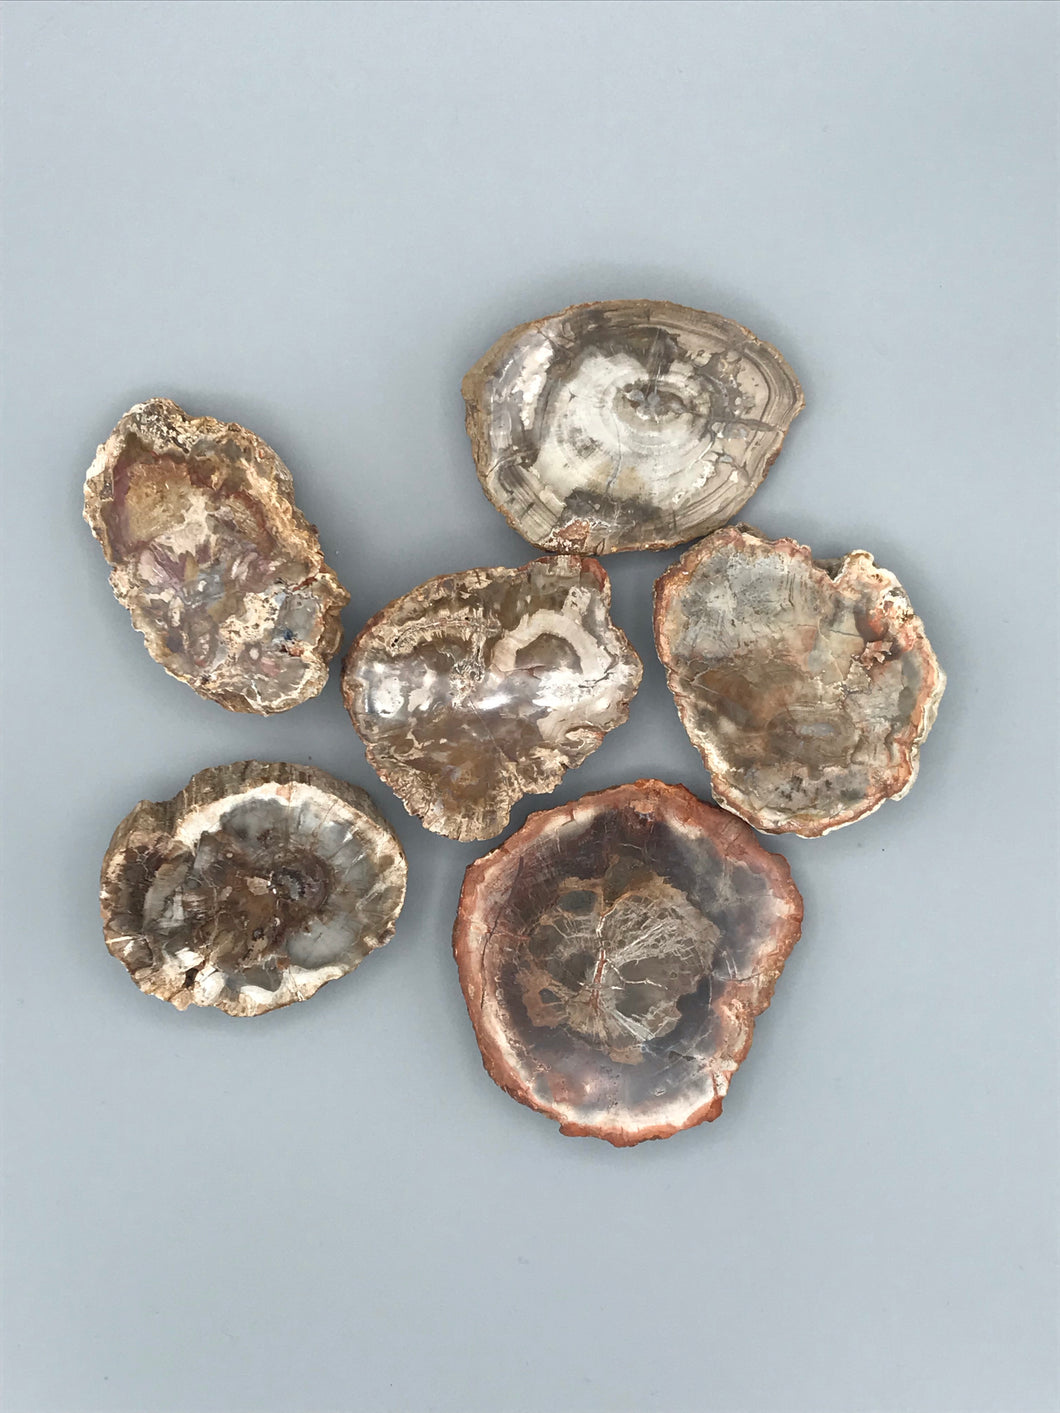 Petrified Wood Branch Slices and Branch Pieces Madagascar